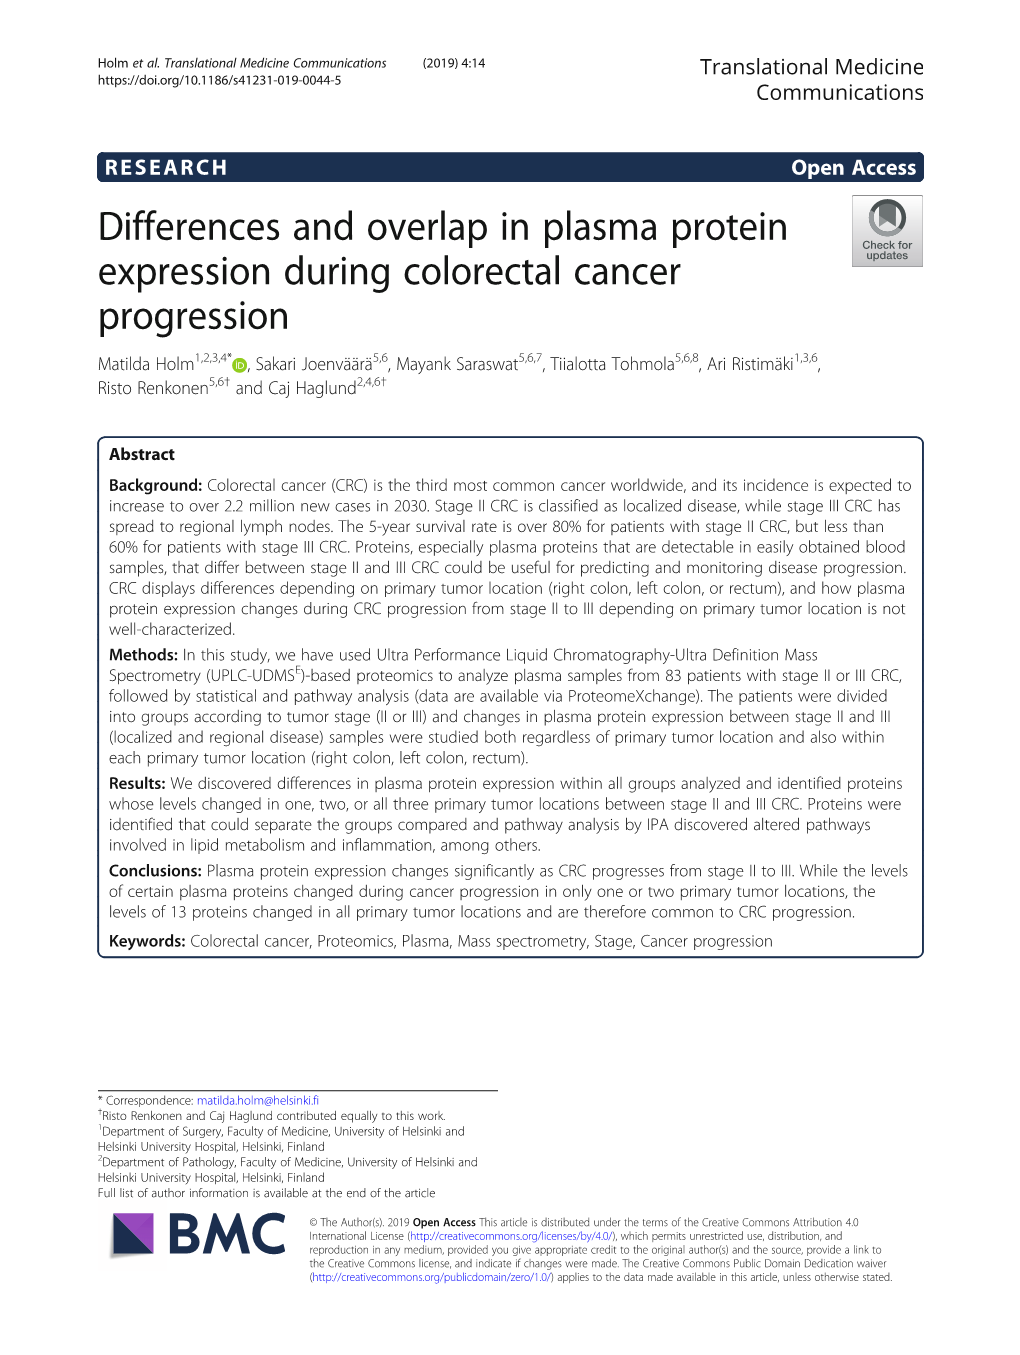 Differences and Overlap in Plasma Protein Expression During Colorectal